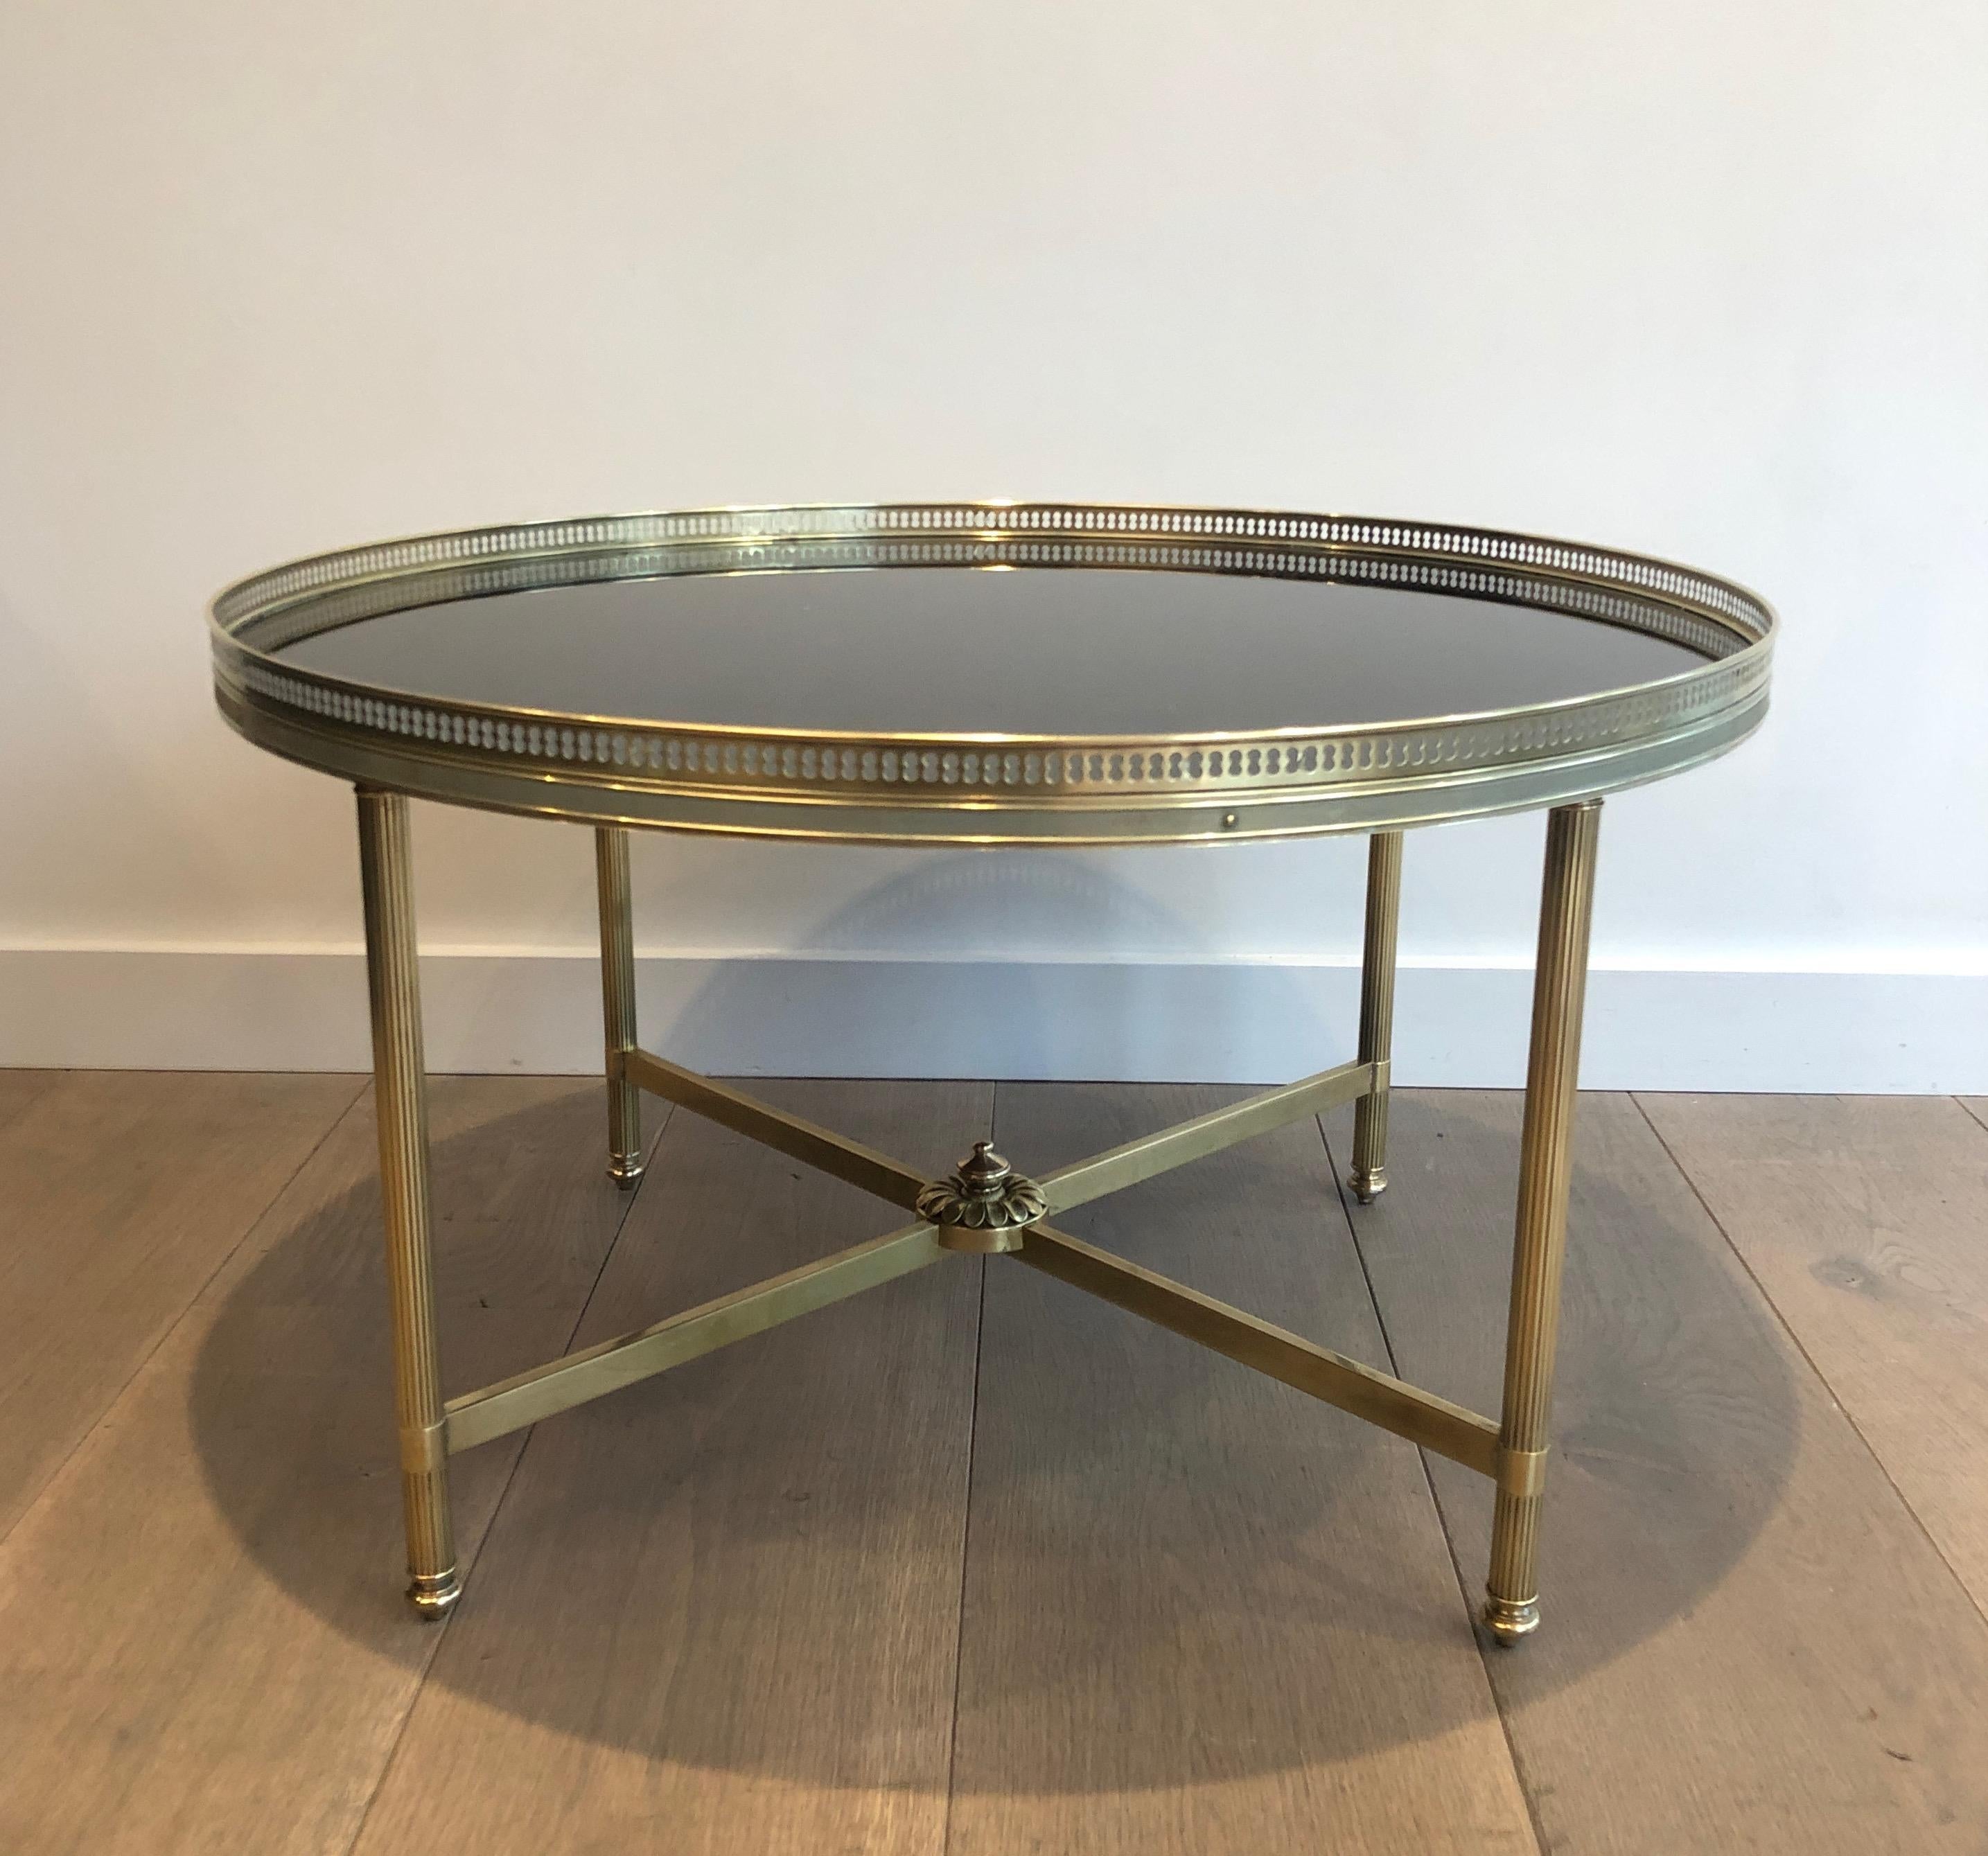 This very nice and elegant neoclassical style coffee table is made of brass with a black lacquered glass top. This is a French work by famous Maison Jansen. Circa 1940.